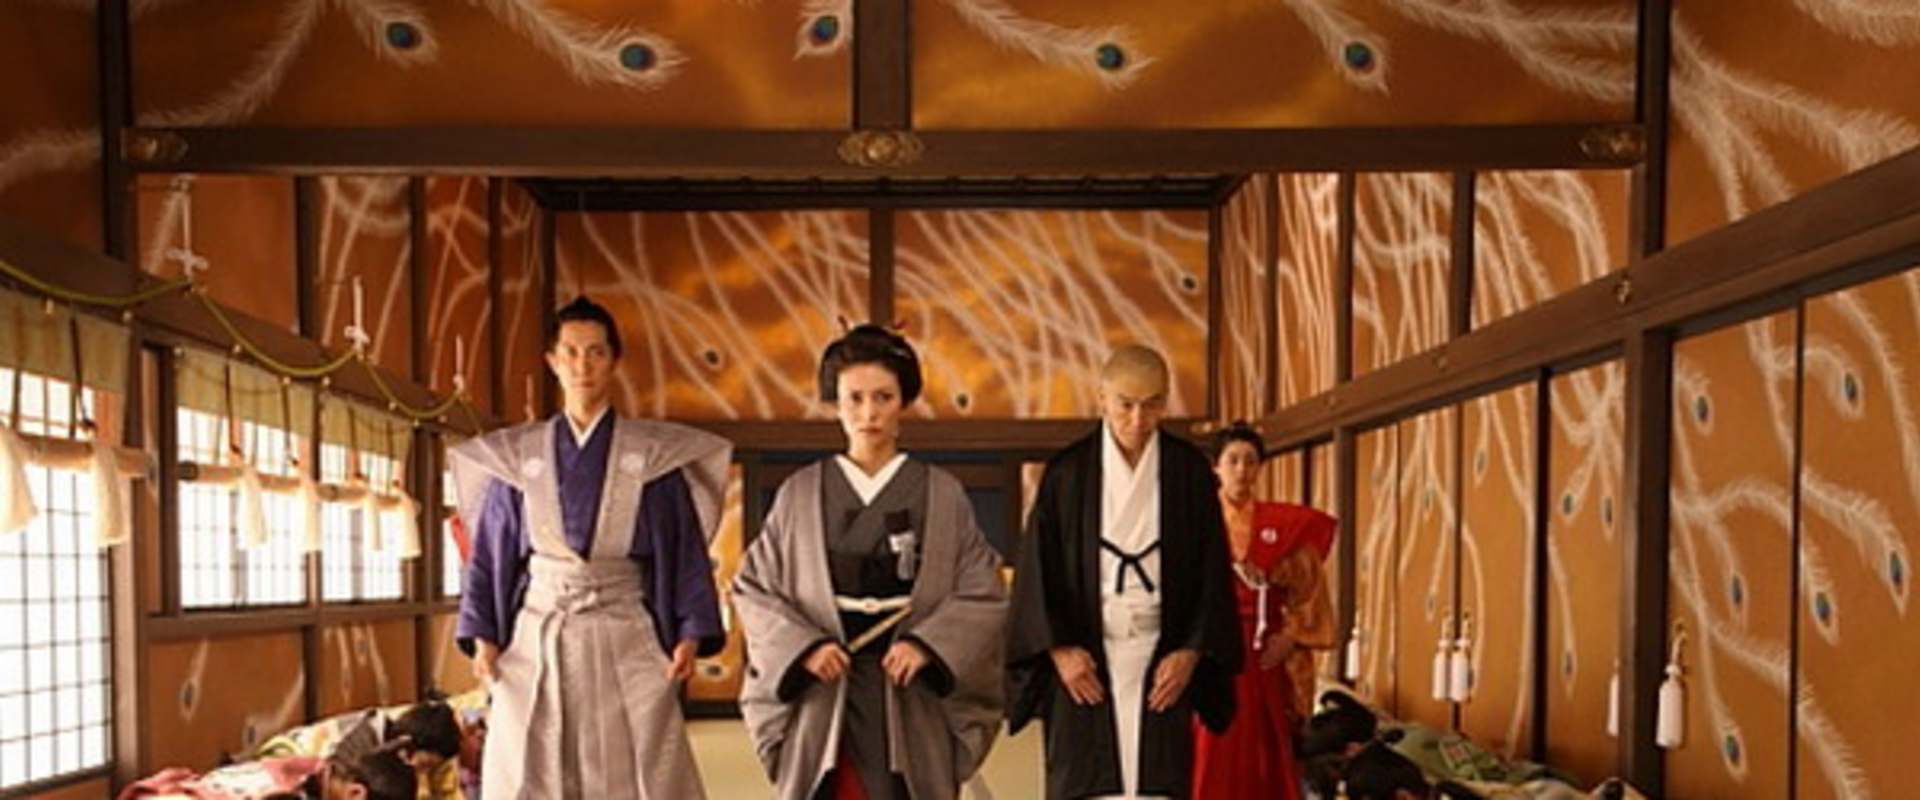 The Lady Shogun and Her Men background 1